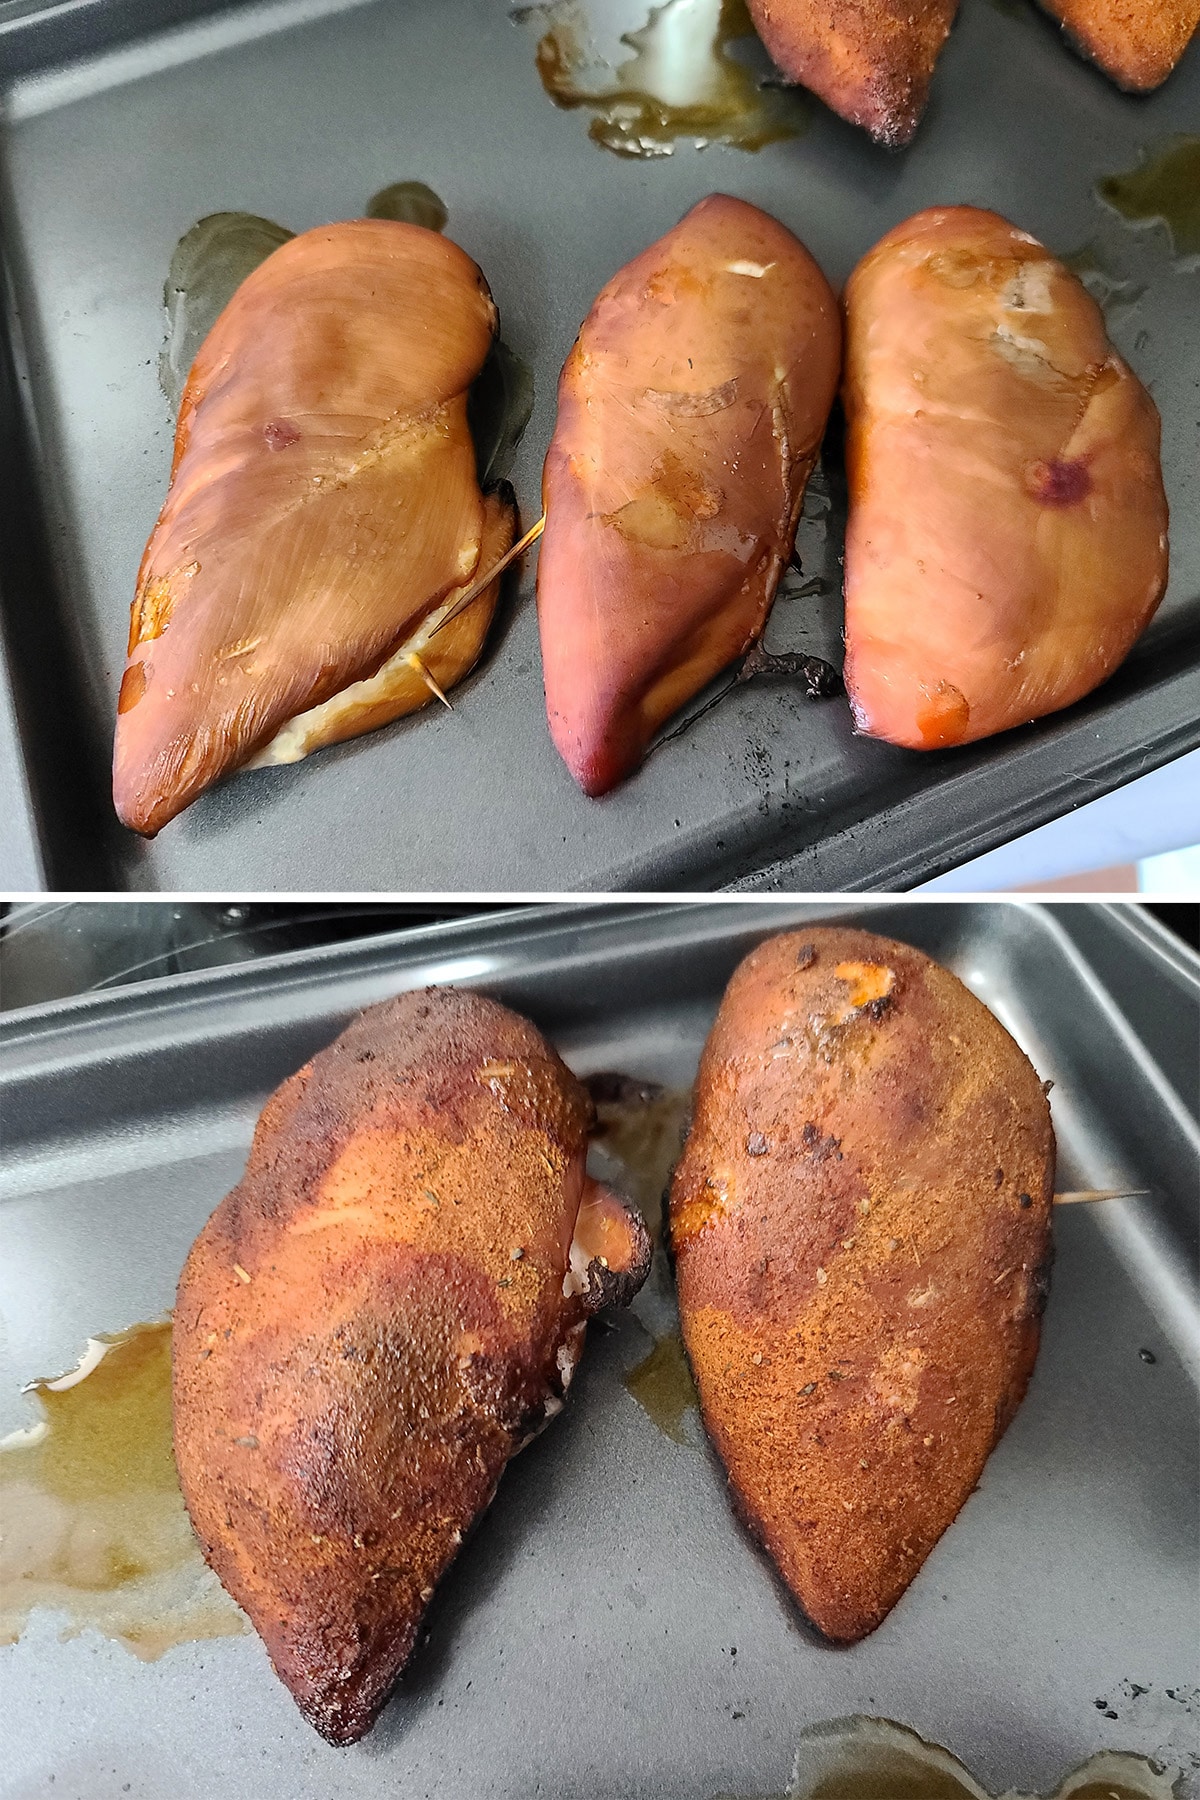 Several smoked chicken breasts, with and without a spice rub.